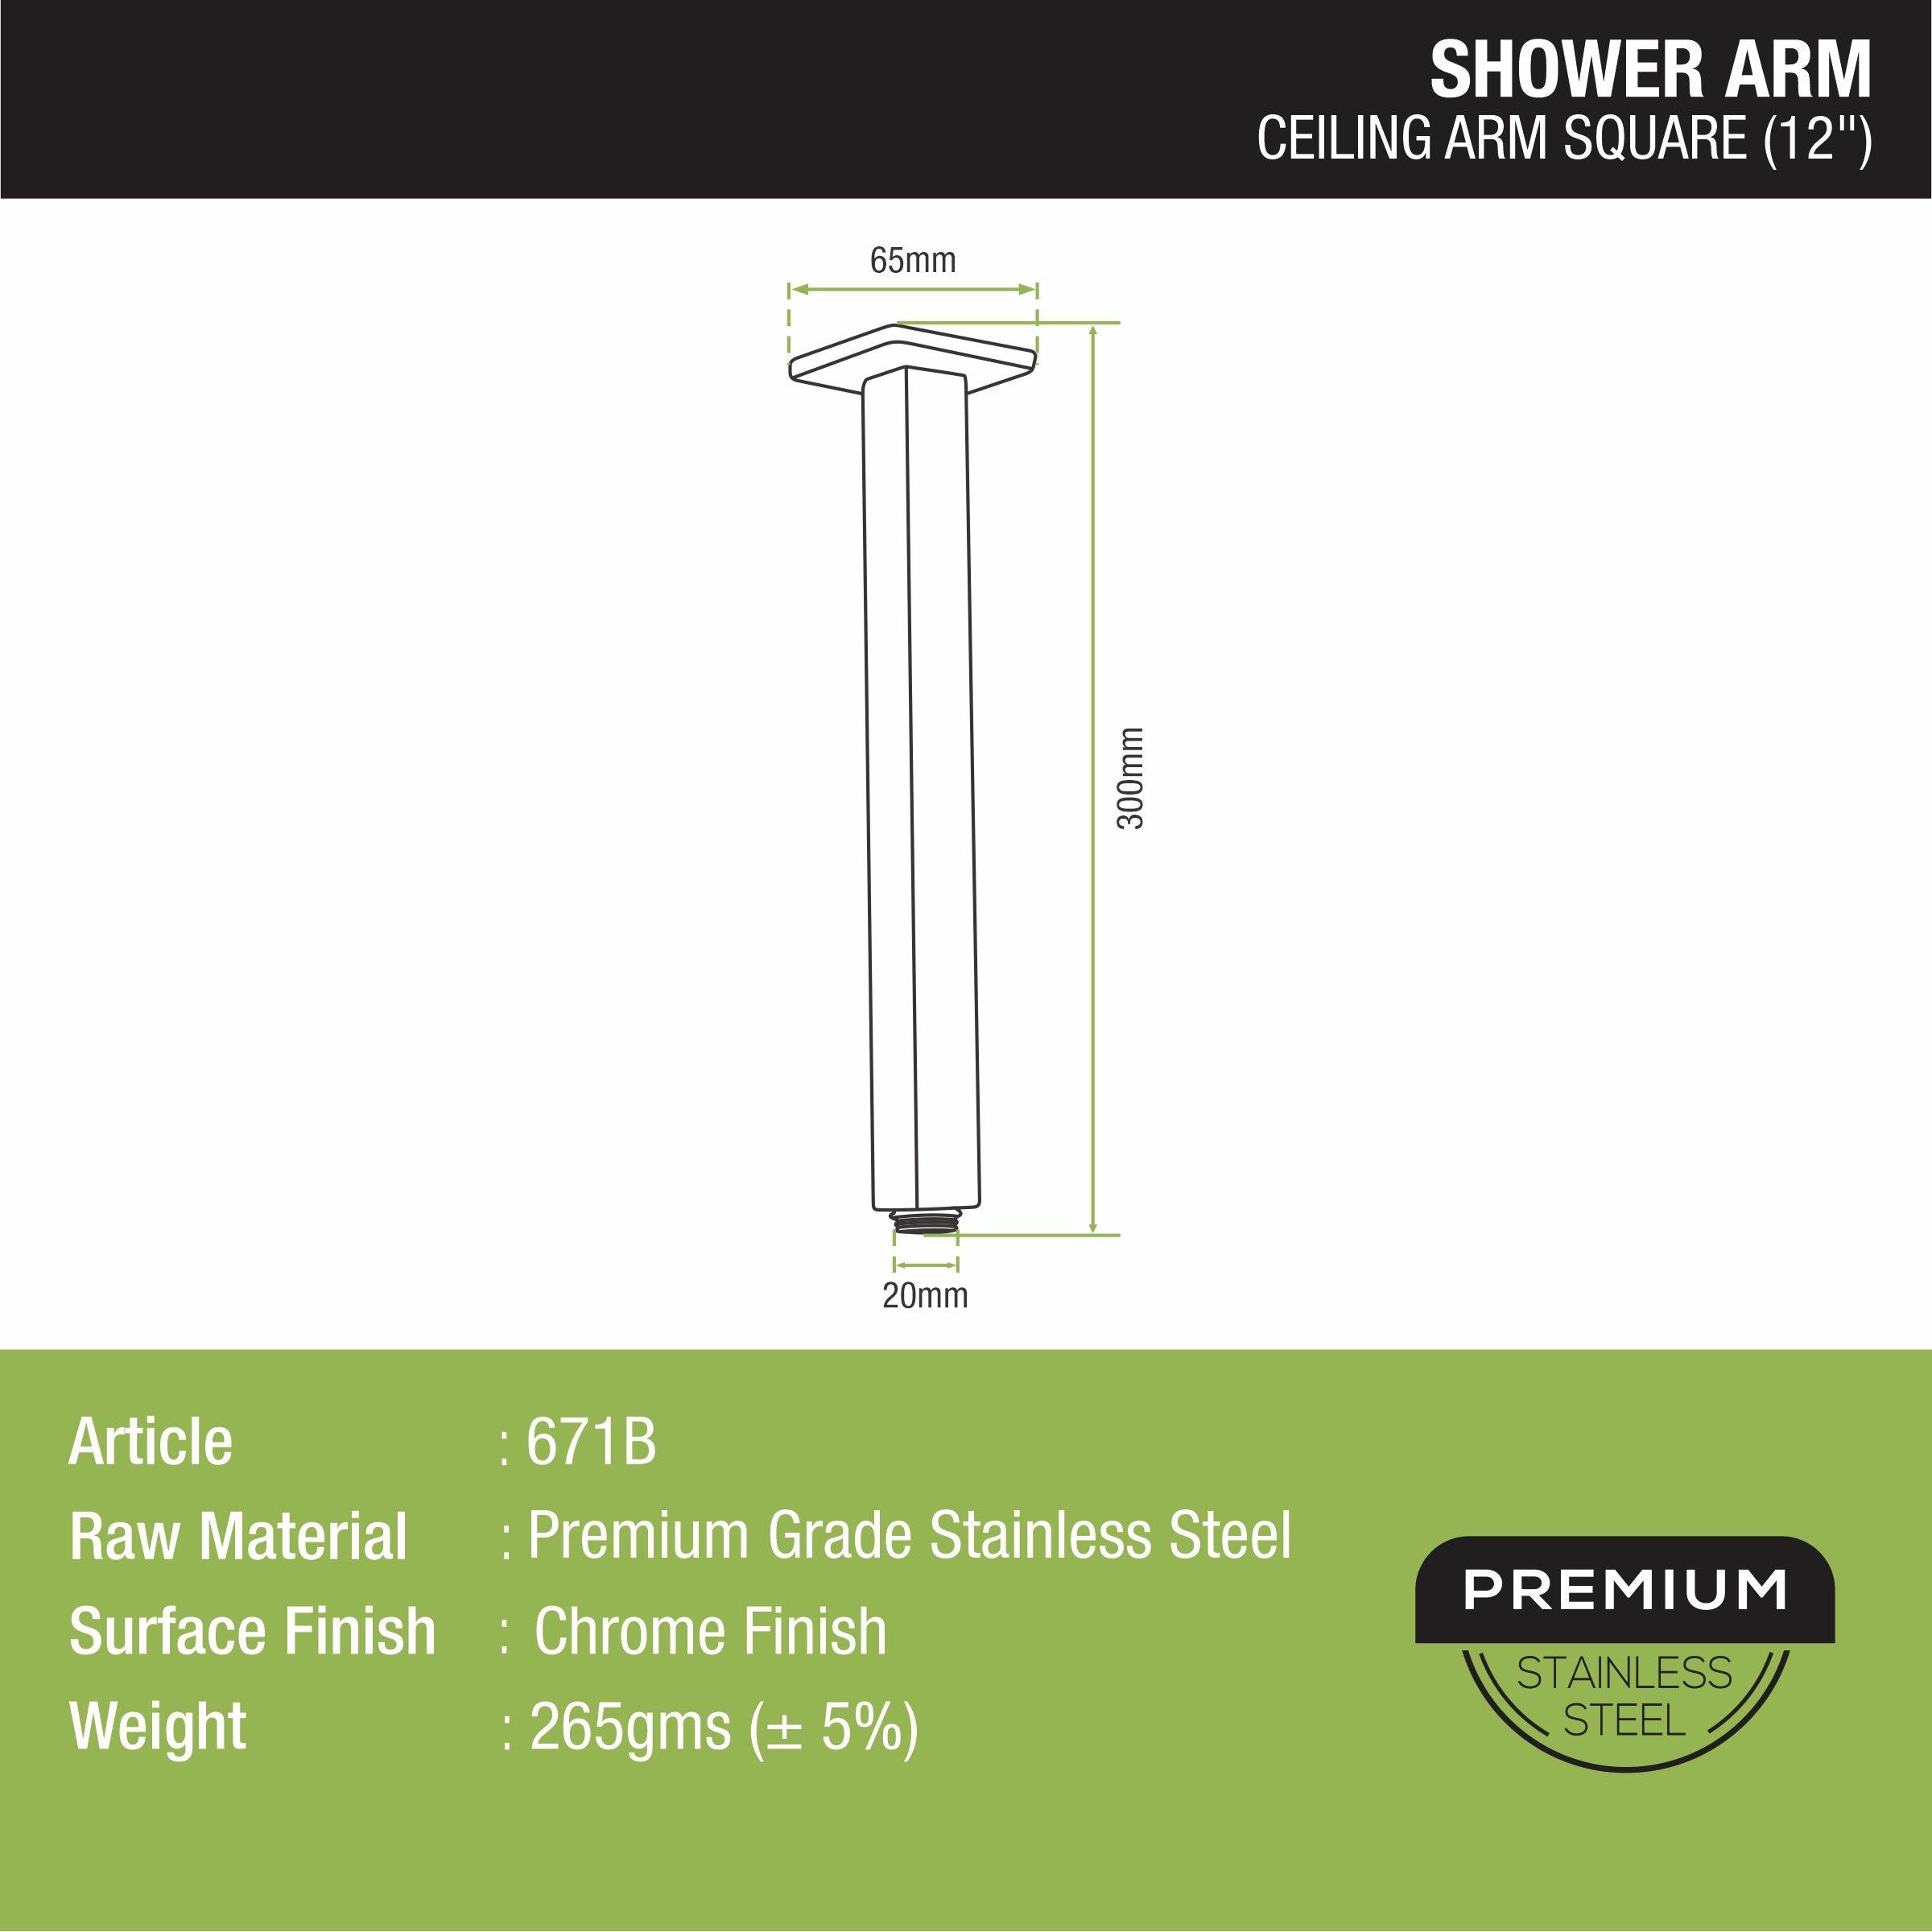 Ceiling Shower Arm (12 Inches) sizes and dimensions